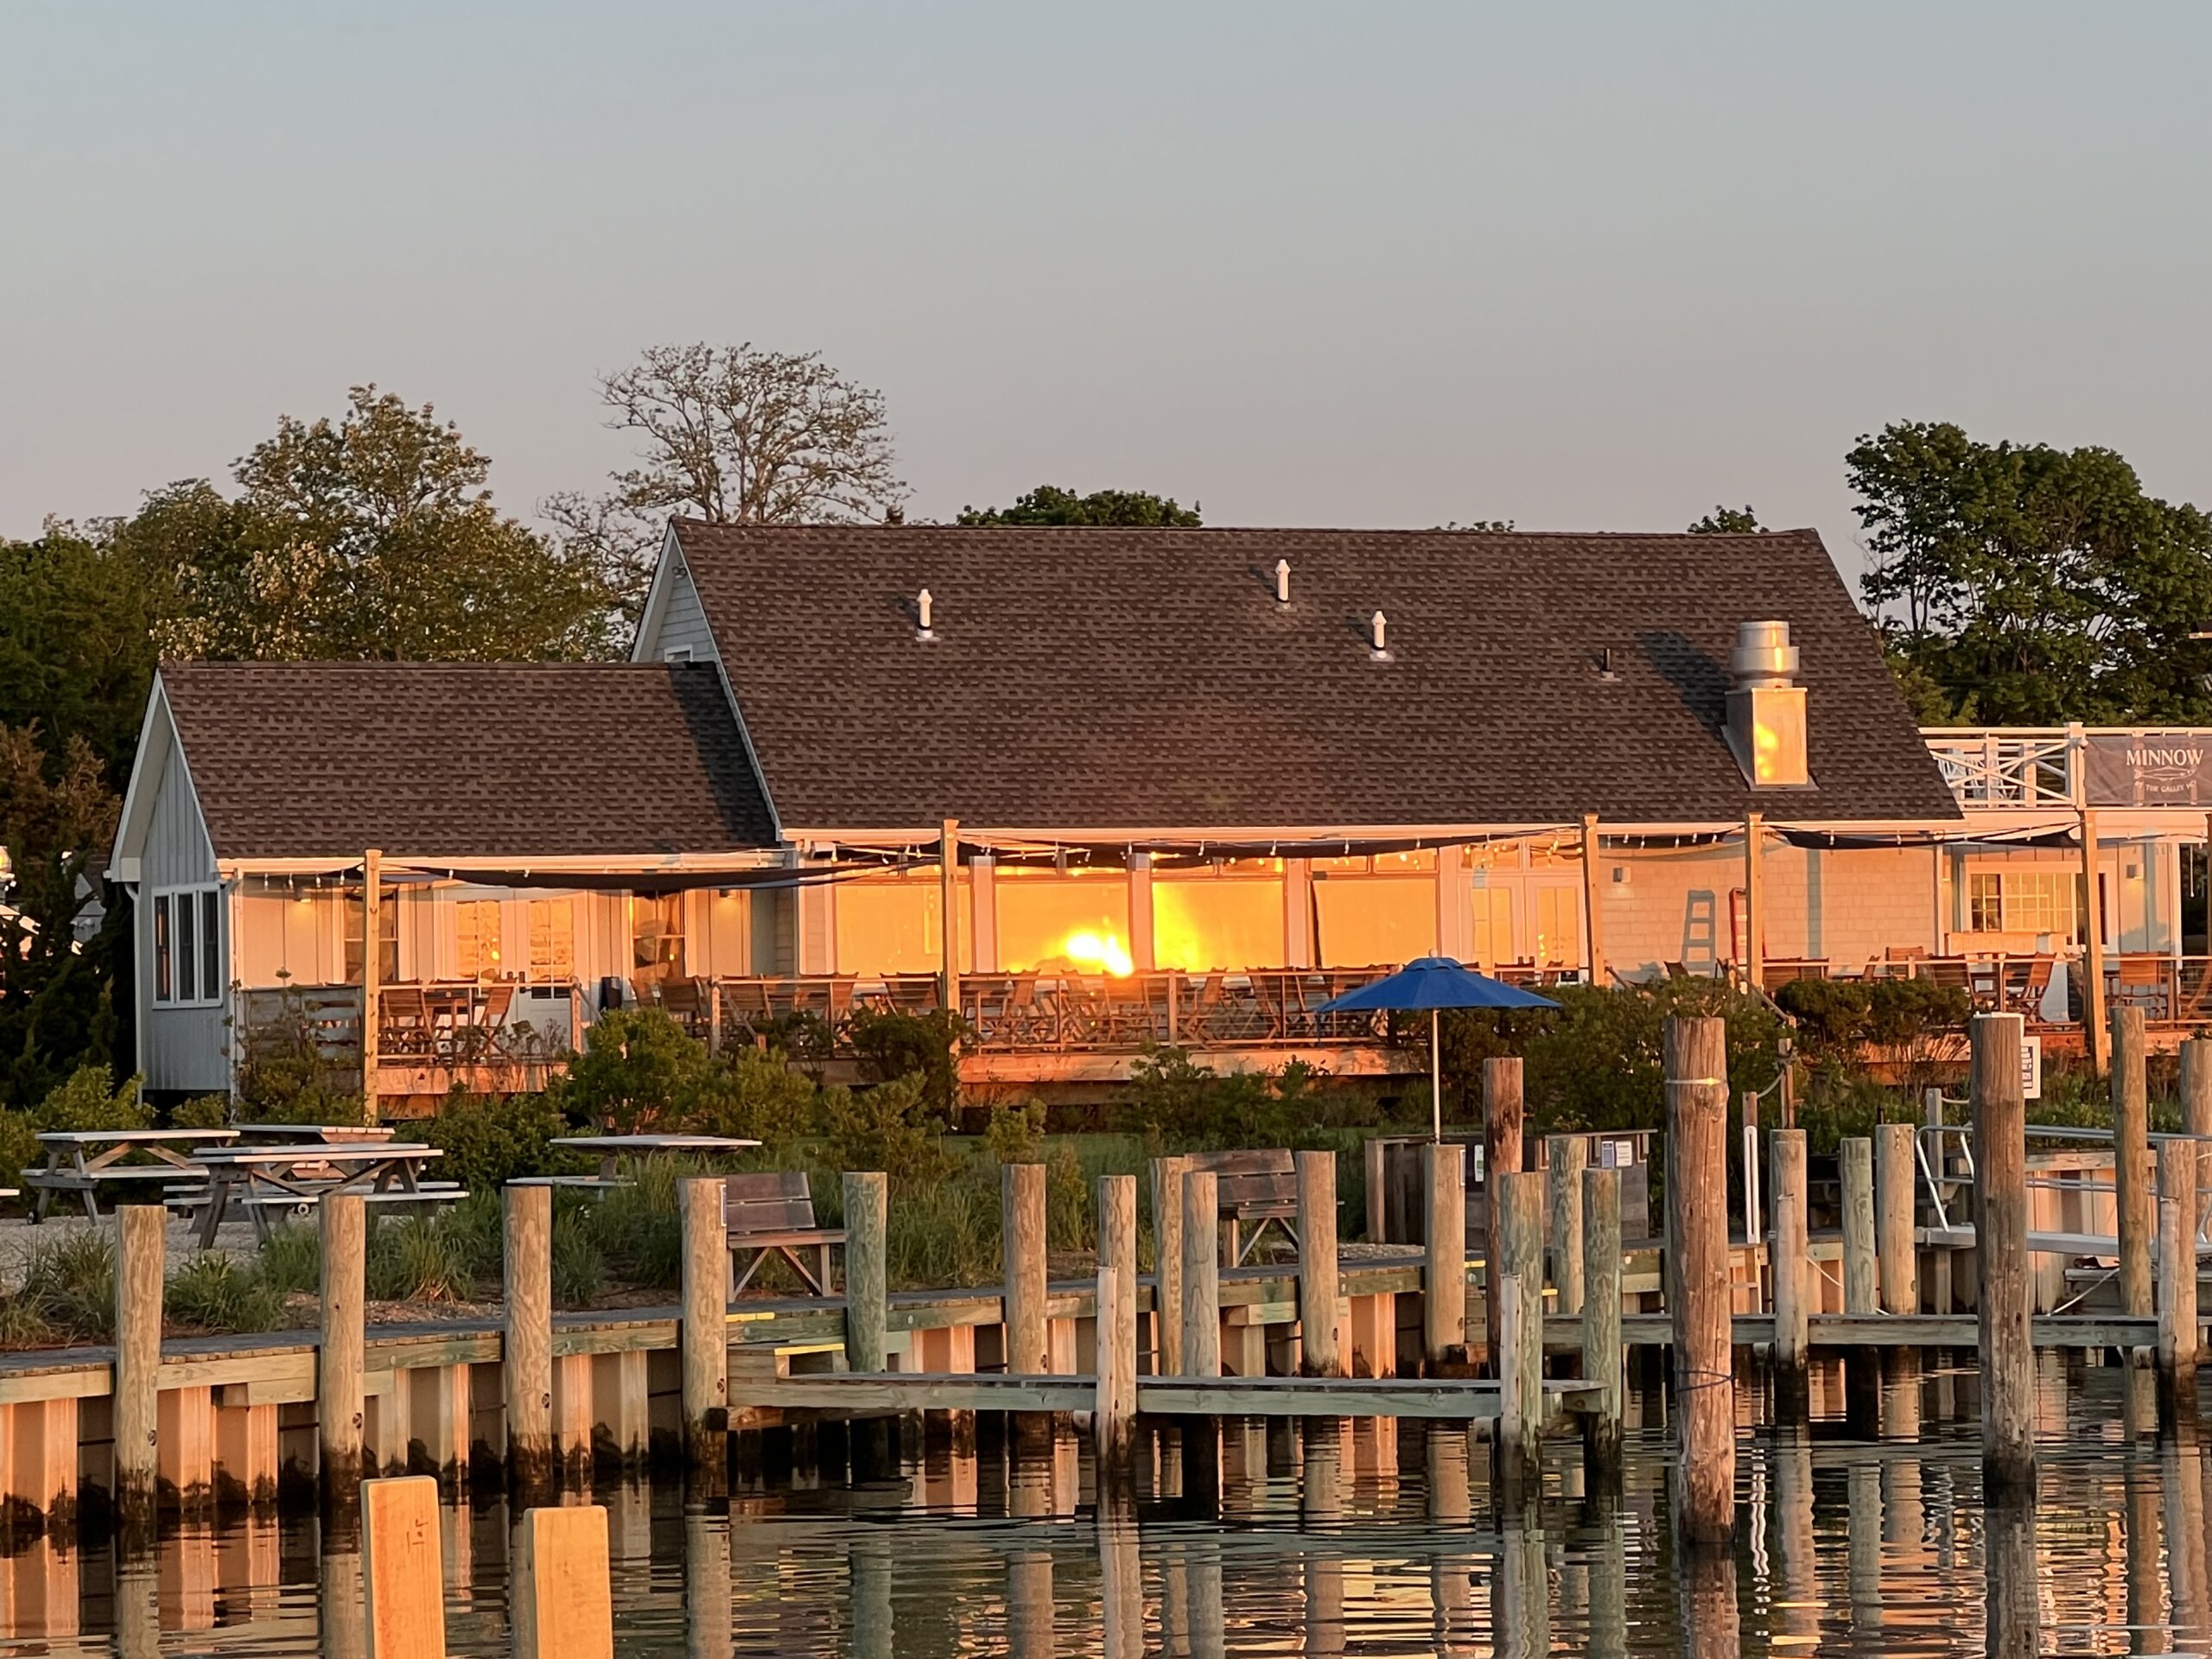 Sunrise on the former Galley Ho restaurant, now known as Minnow